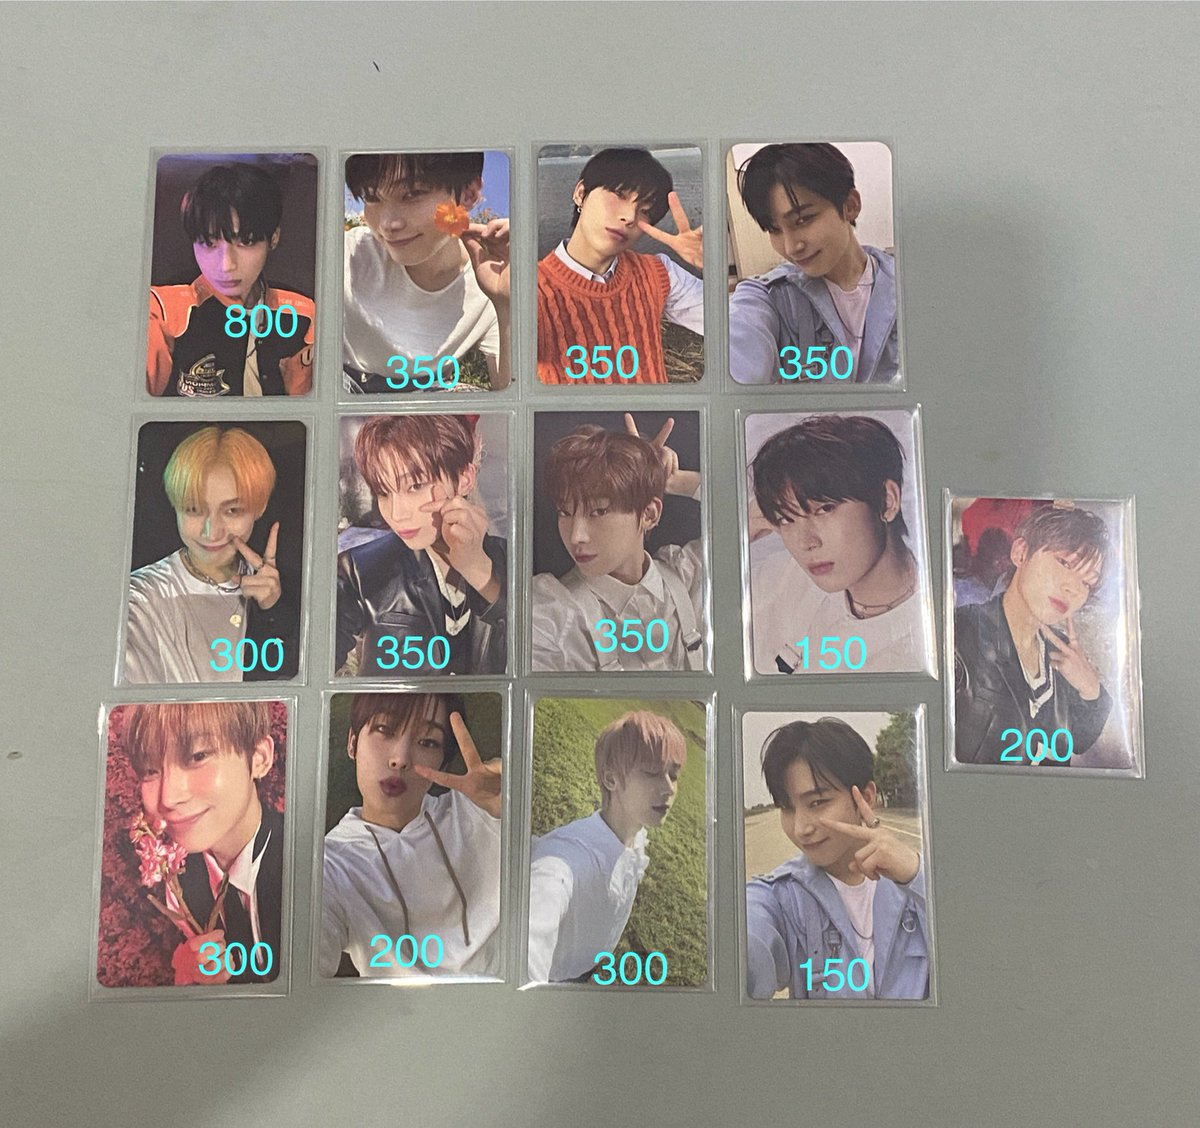 WTS LFB PH ENHYPEN PC #shiilorasells 
tingi
〰️ payo | dop 24hrs
〰️ onhand | ❌ sensi
〰️ MOP: Gcash
〰️ MOD: J&T 
_________________________

〰️will give a lot of freebies to set taker

reply “mine” or dm to claim